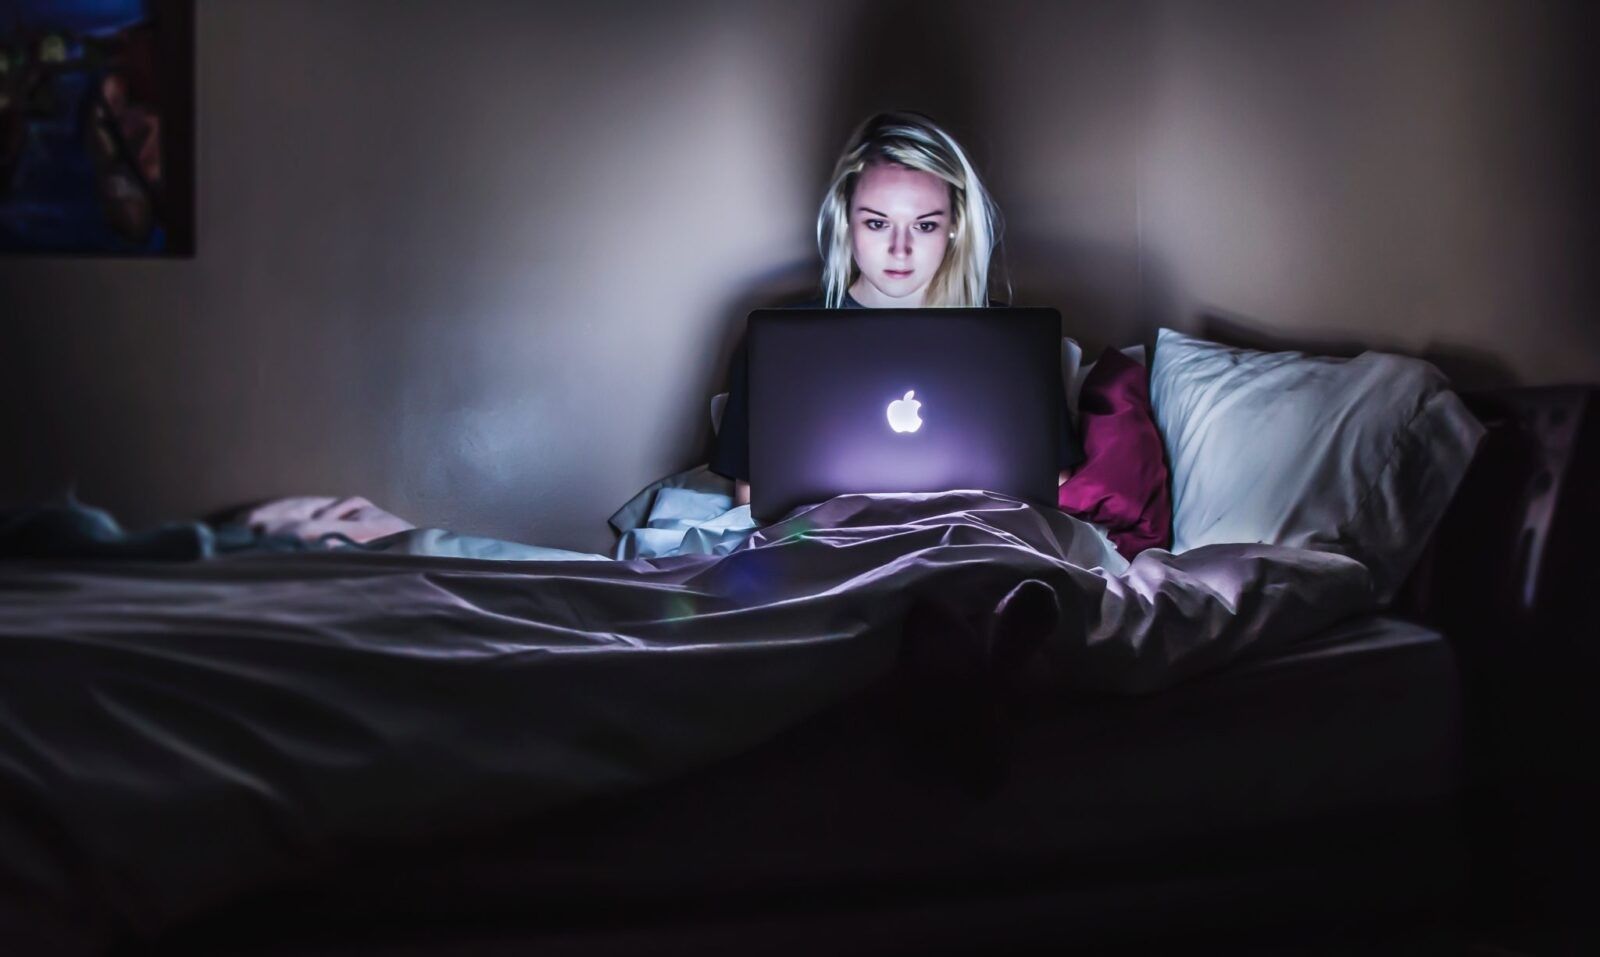 Woman-on-a-laptop-in-bed